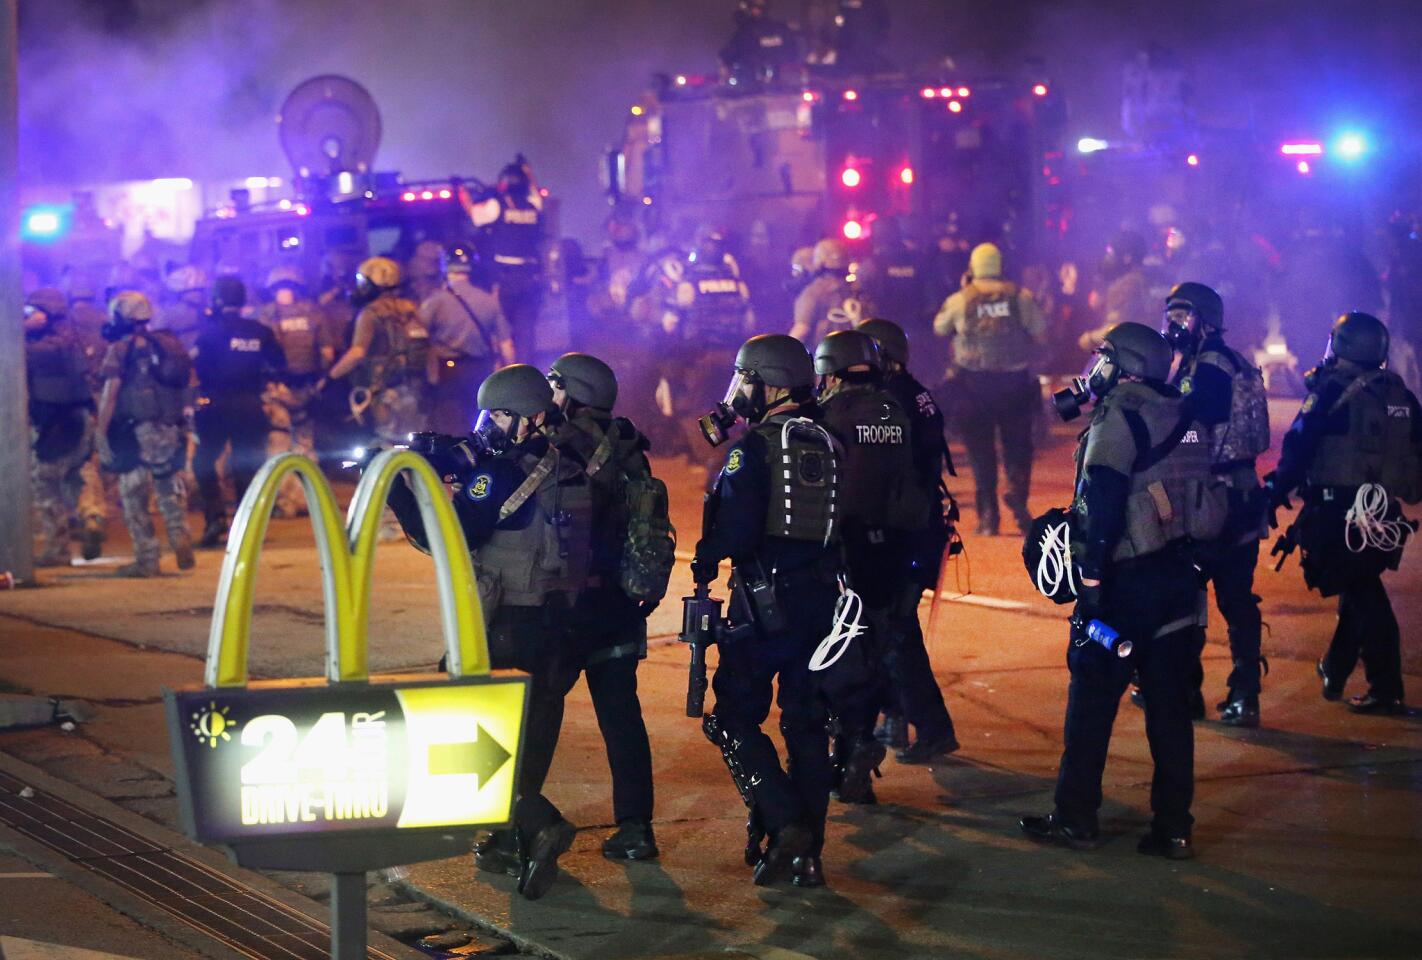 Police advance through a cloud of tear gas toward demonstrators protesting the killing of 18-year-old Michael Brown in Ferguson, Mo.